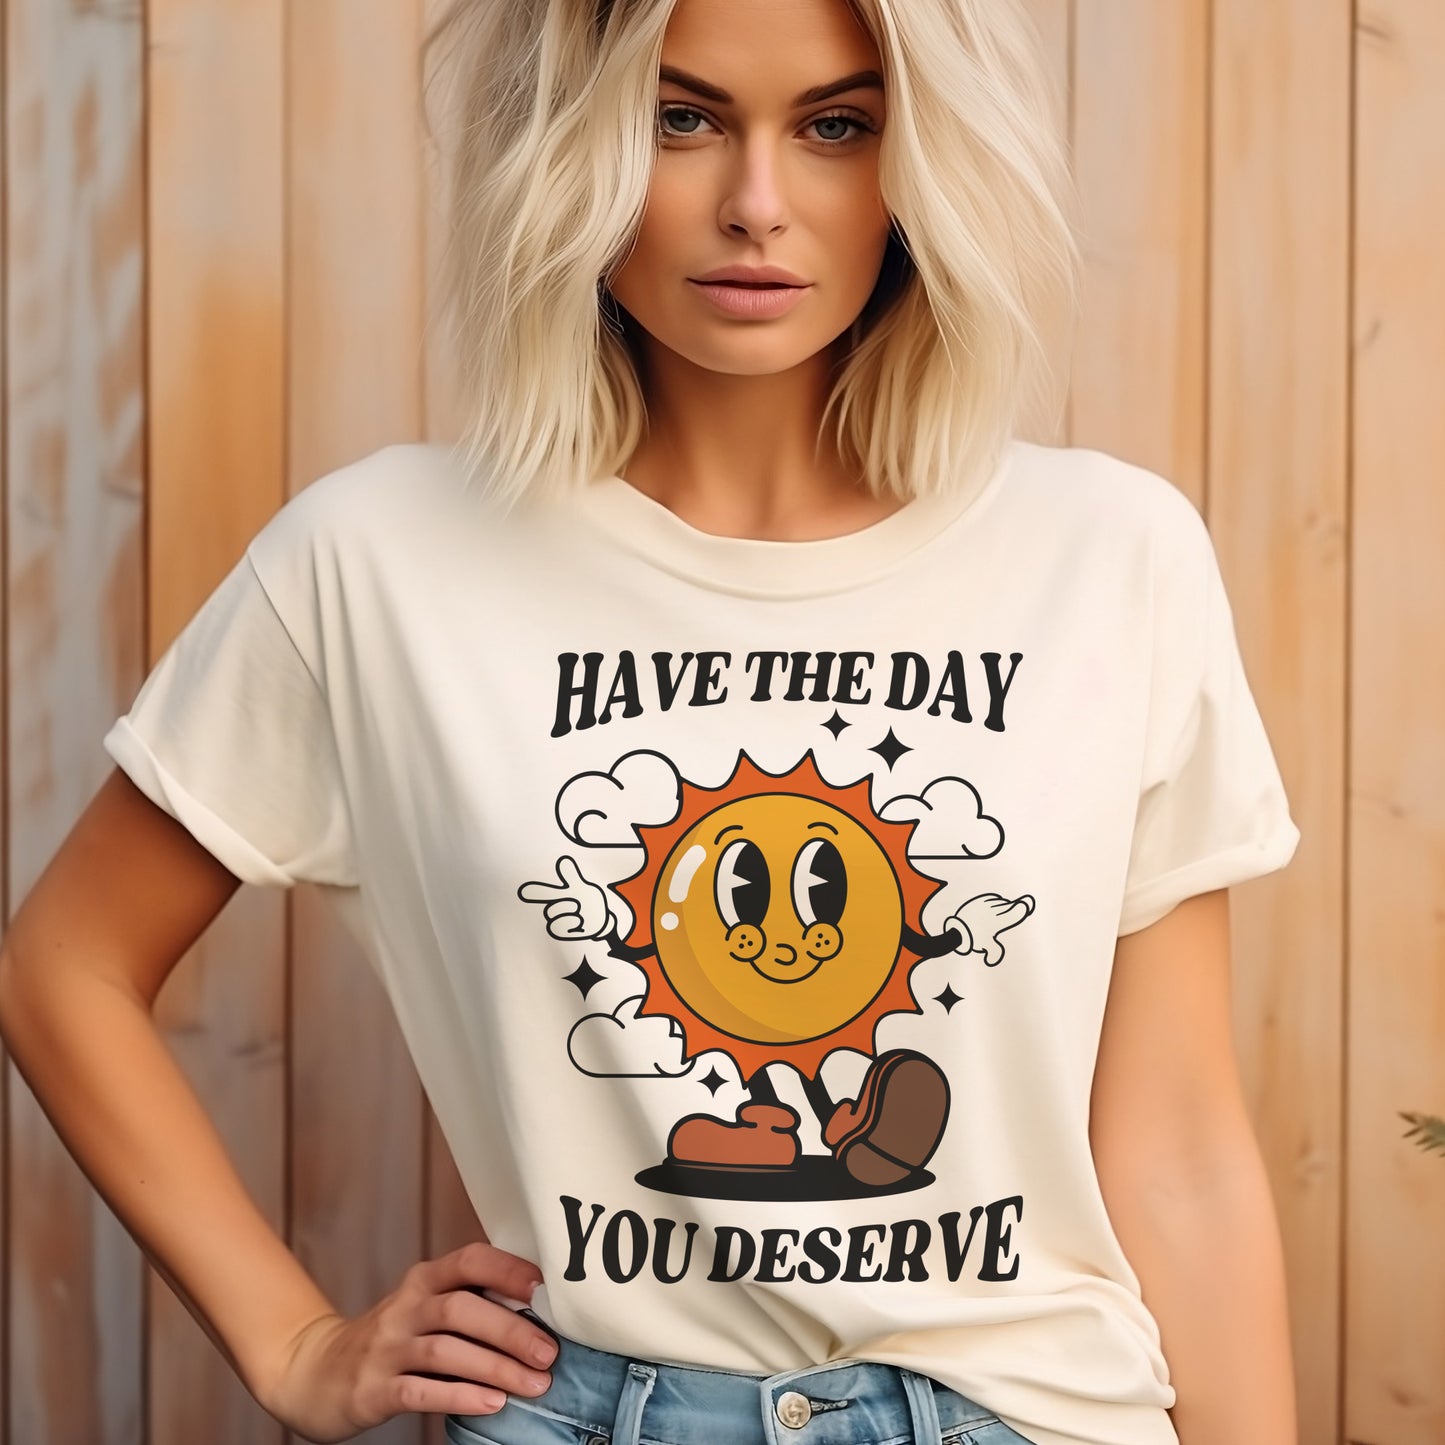 Have the Day you Deserve T-Shirt Funny Relatable Tshirt Sarcastic Fun Tee Soft Print Shirt Sublimation Print T-Shirt Funny Sarcastic Tshirt Day you Deserve Tee Casual Comfortable